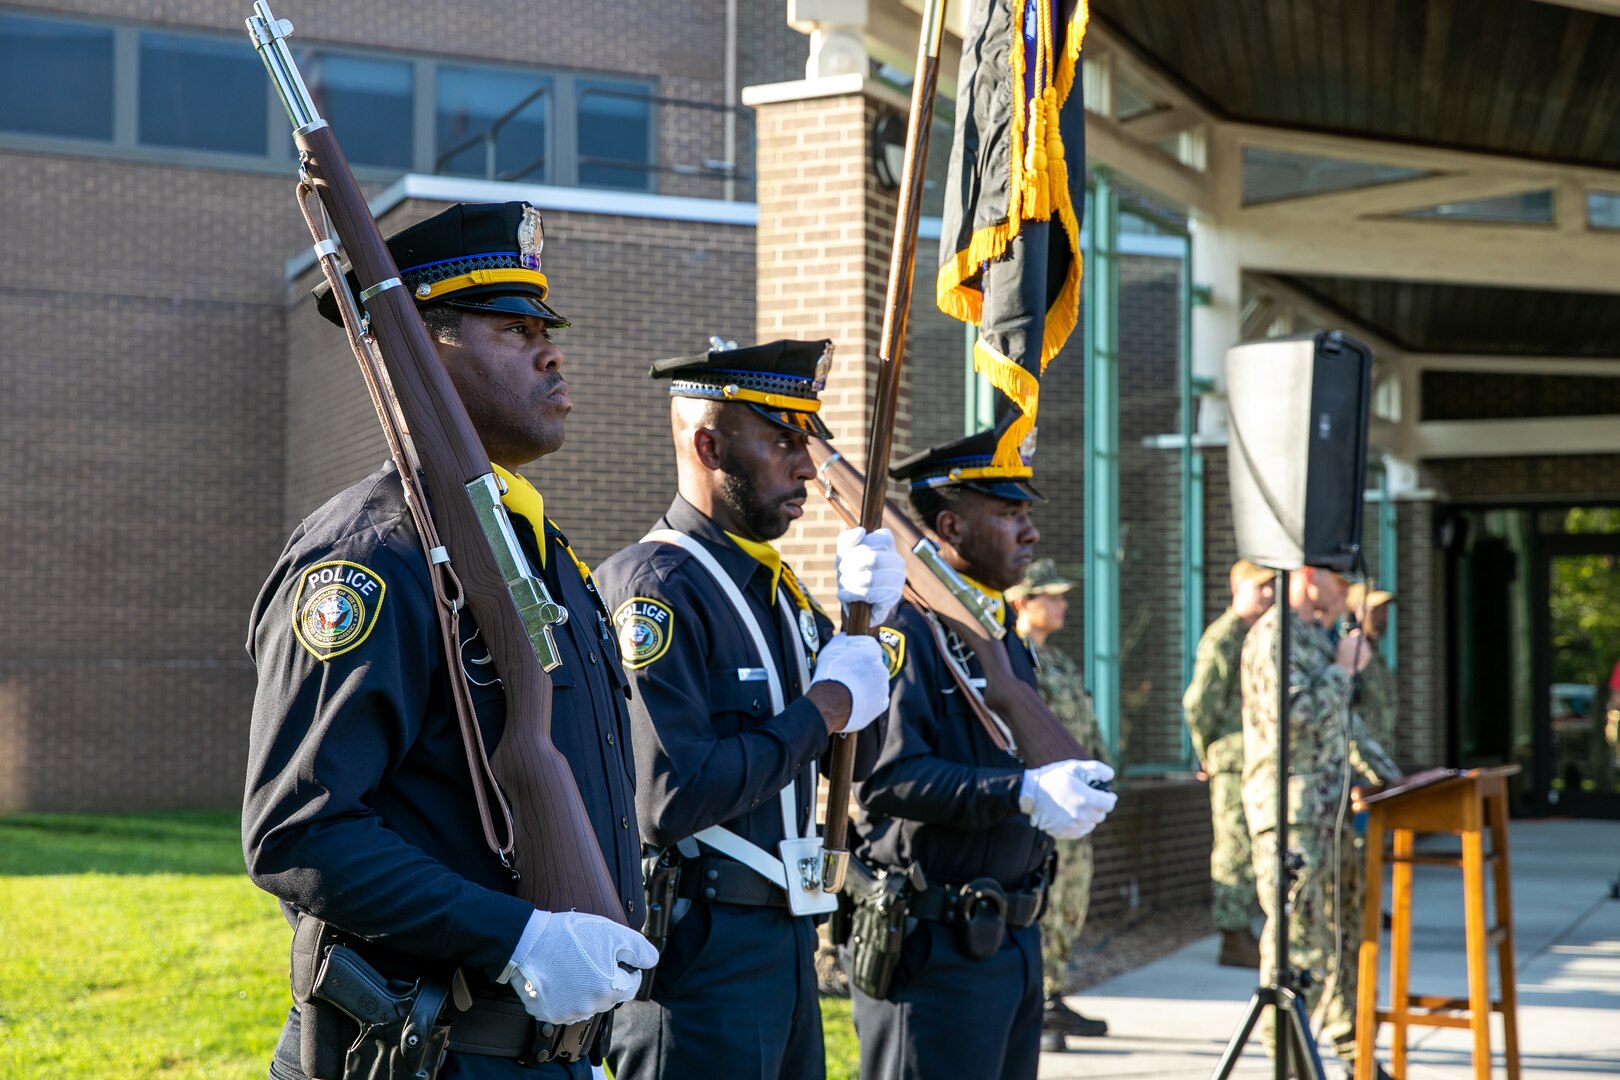 The Norfolk Naval Shipyard Police Color Guard stands ready to honor the fallen on Patriots Day Sept. 11.